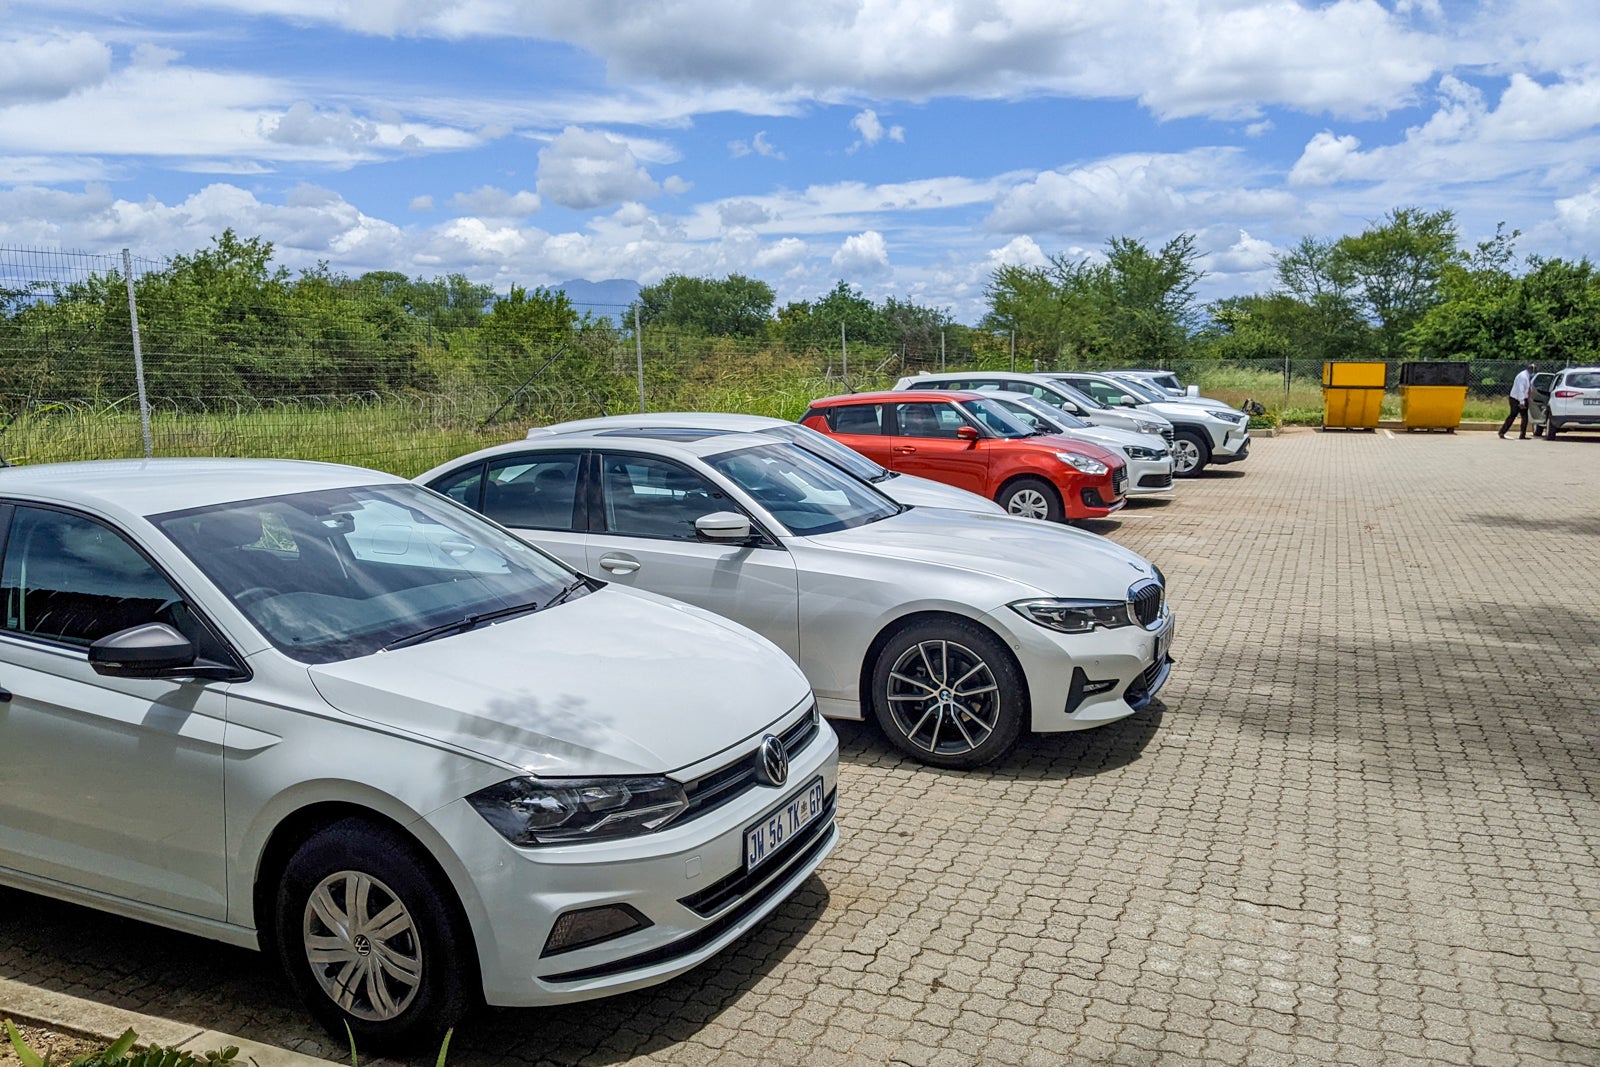 Rental cars in South Africa